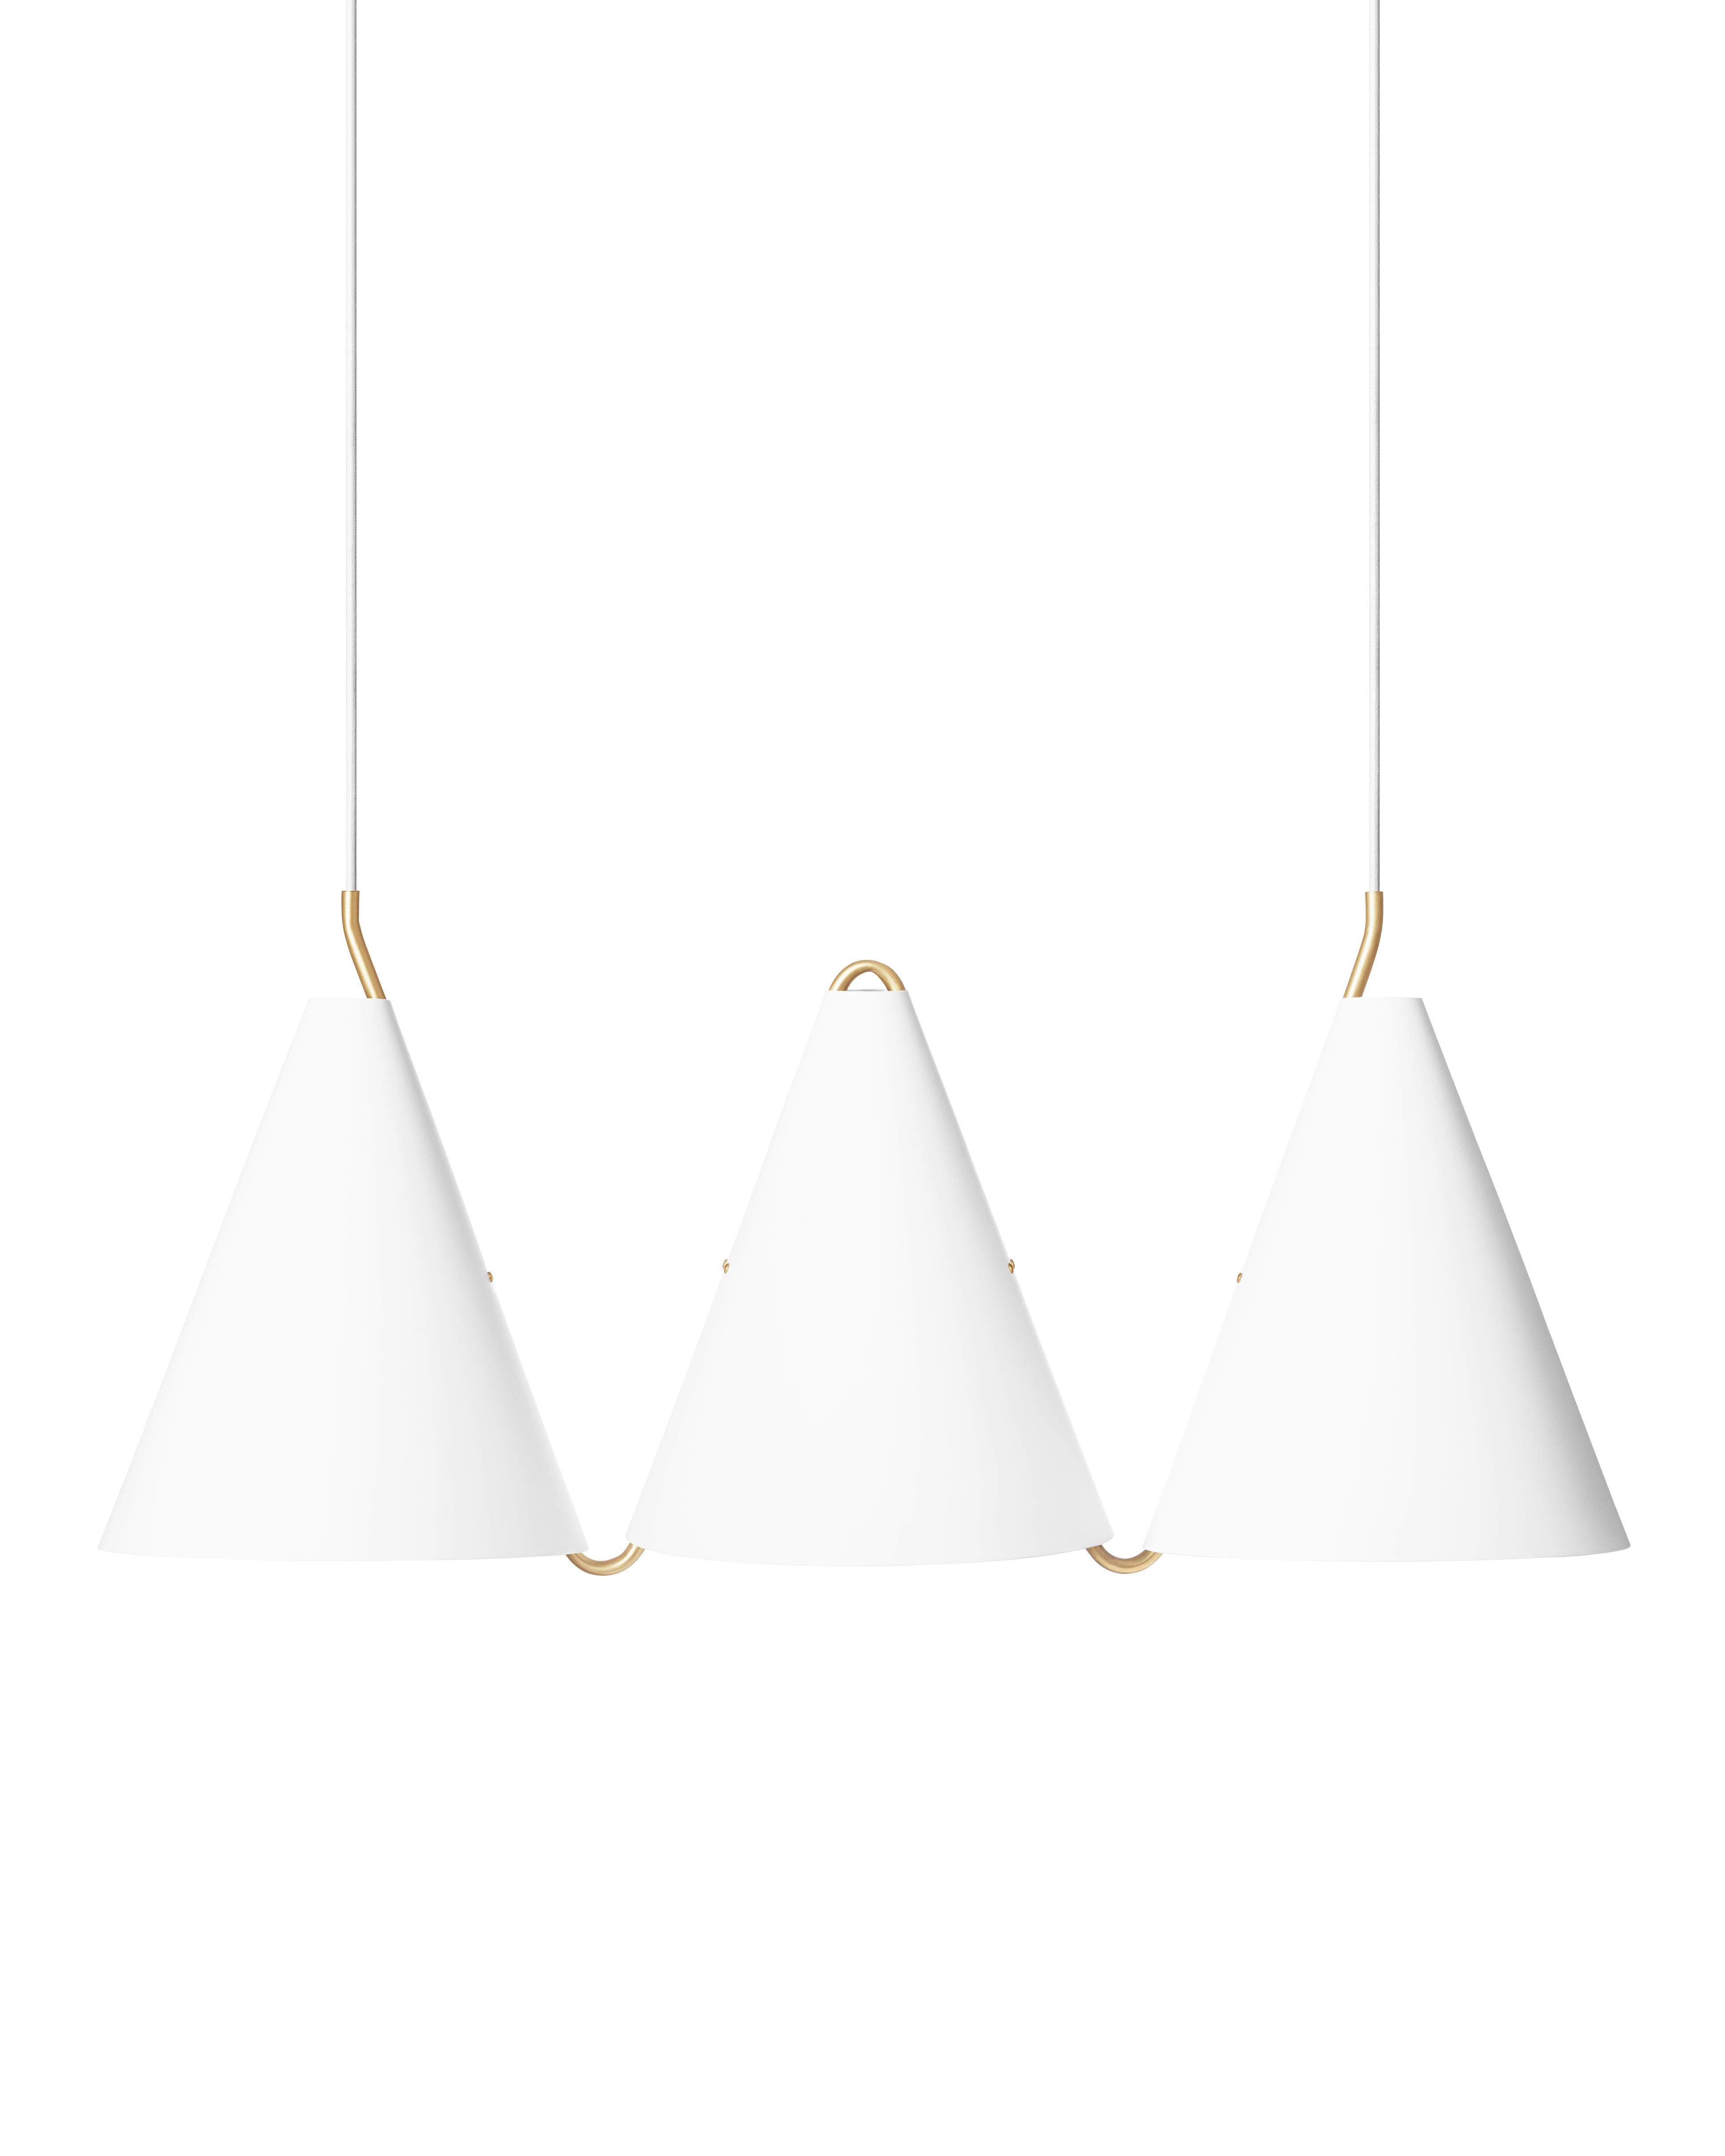 Contemporary Pendant Lamp 'Mosaik III', White Steel For Sale 1